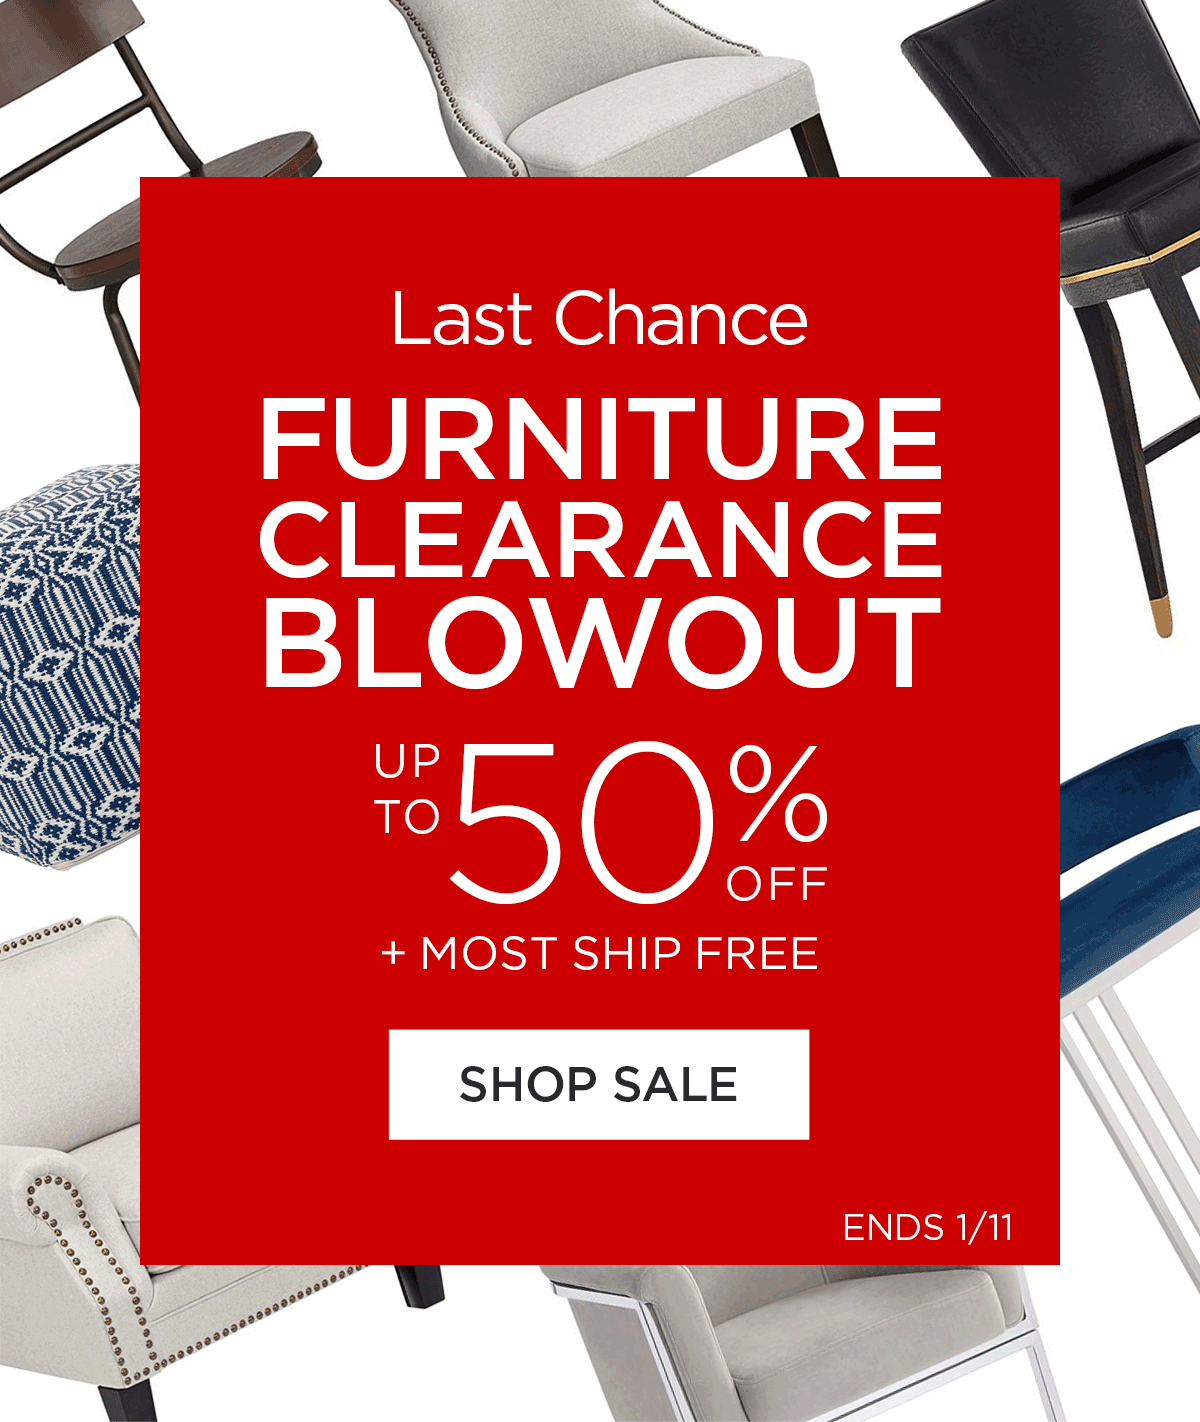 Last Chance - Furniture Clearance Blowout - Up to 50% Off + MOST SHIP FREE - Shop Sale - Ends 1/11